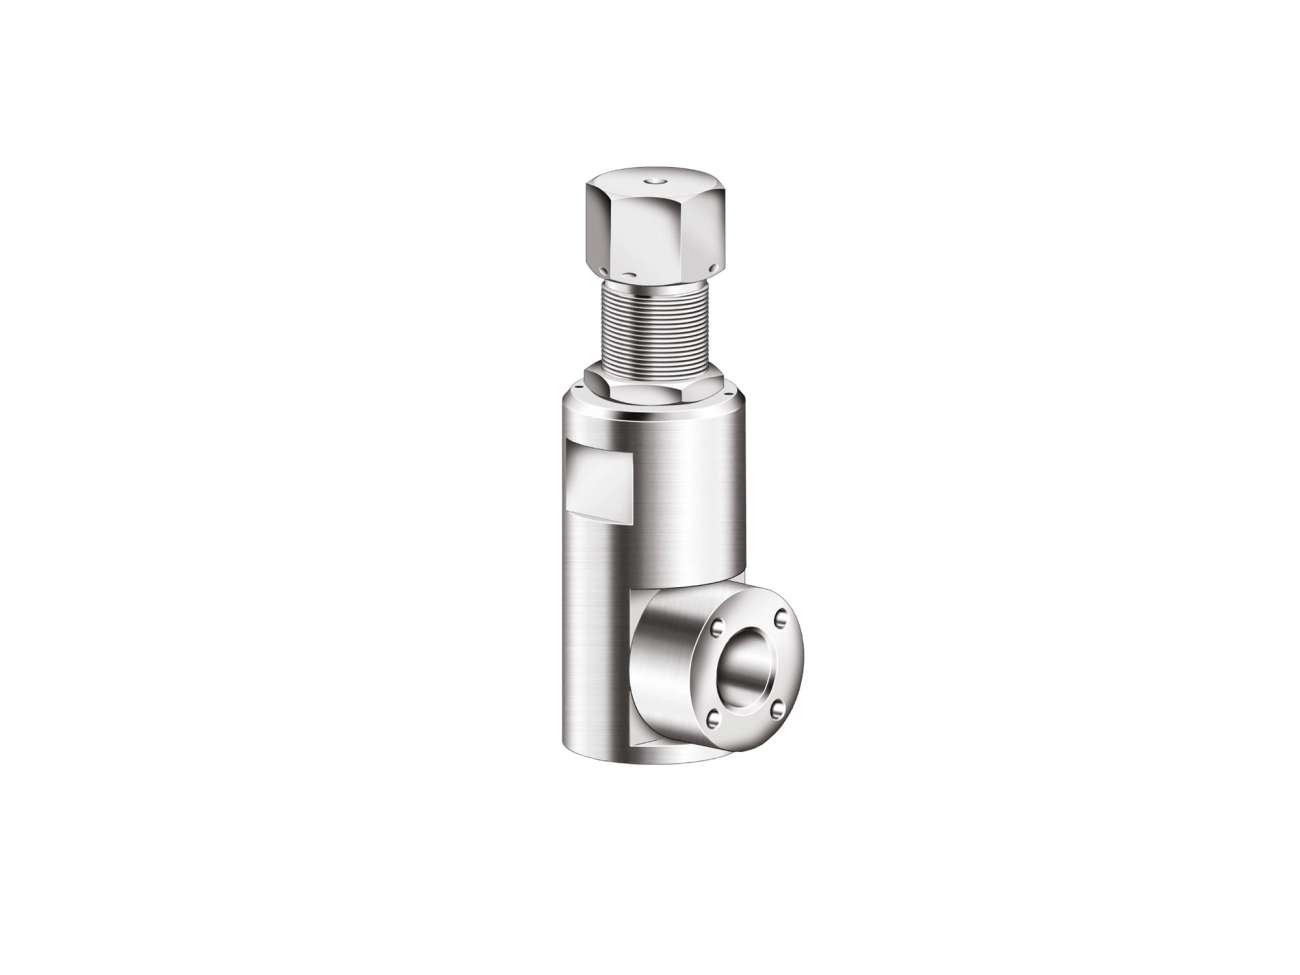 Surface Pressure Relief Valve isolated on a white background